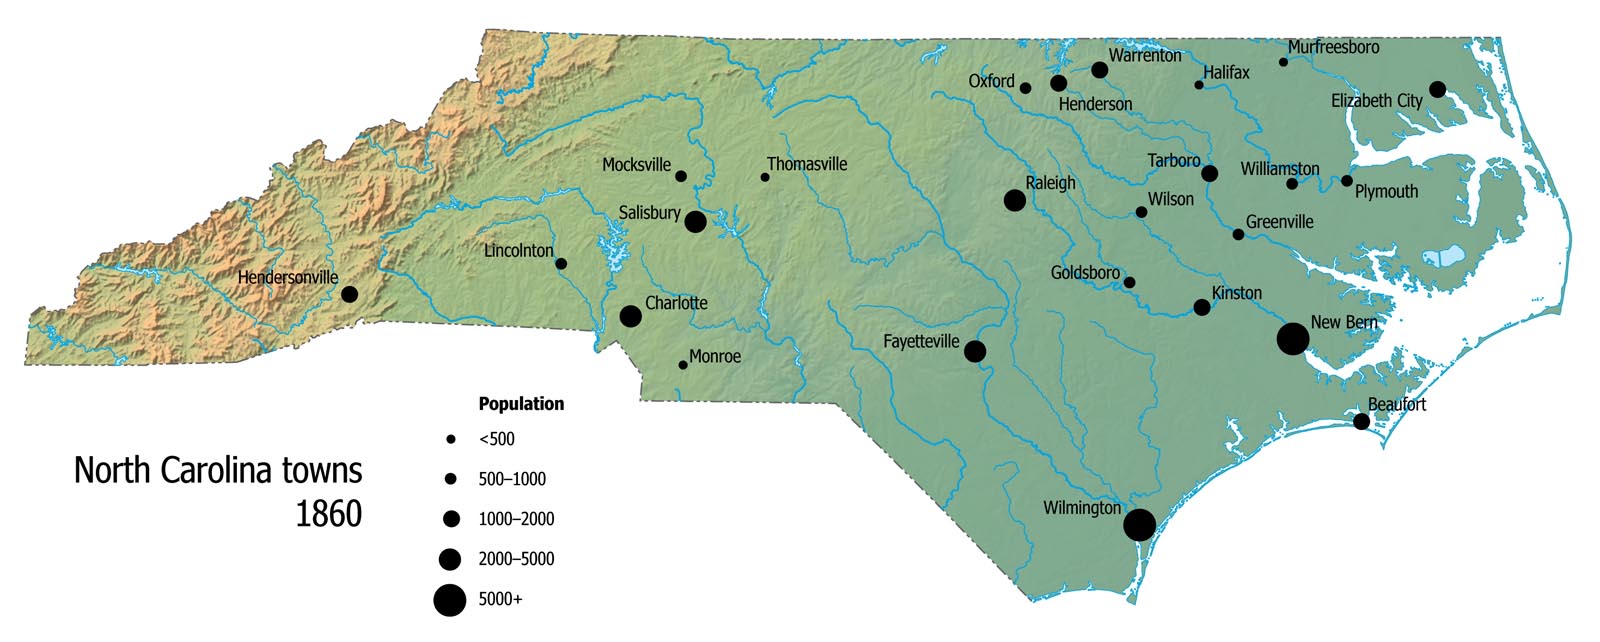 Map of North Carolina towns with population as listed in the 1860 census.